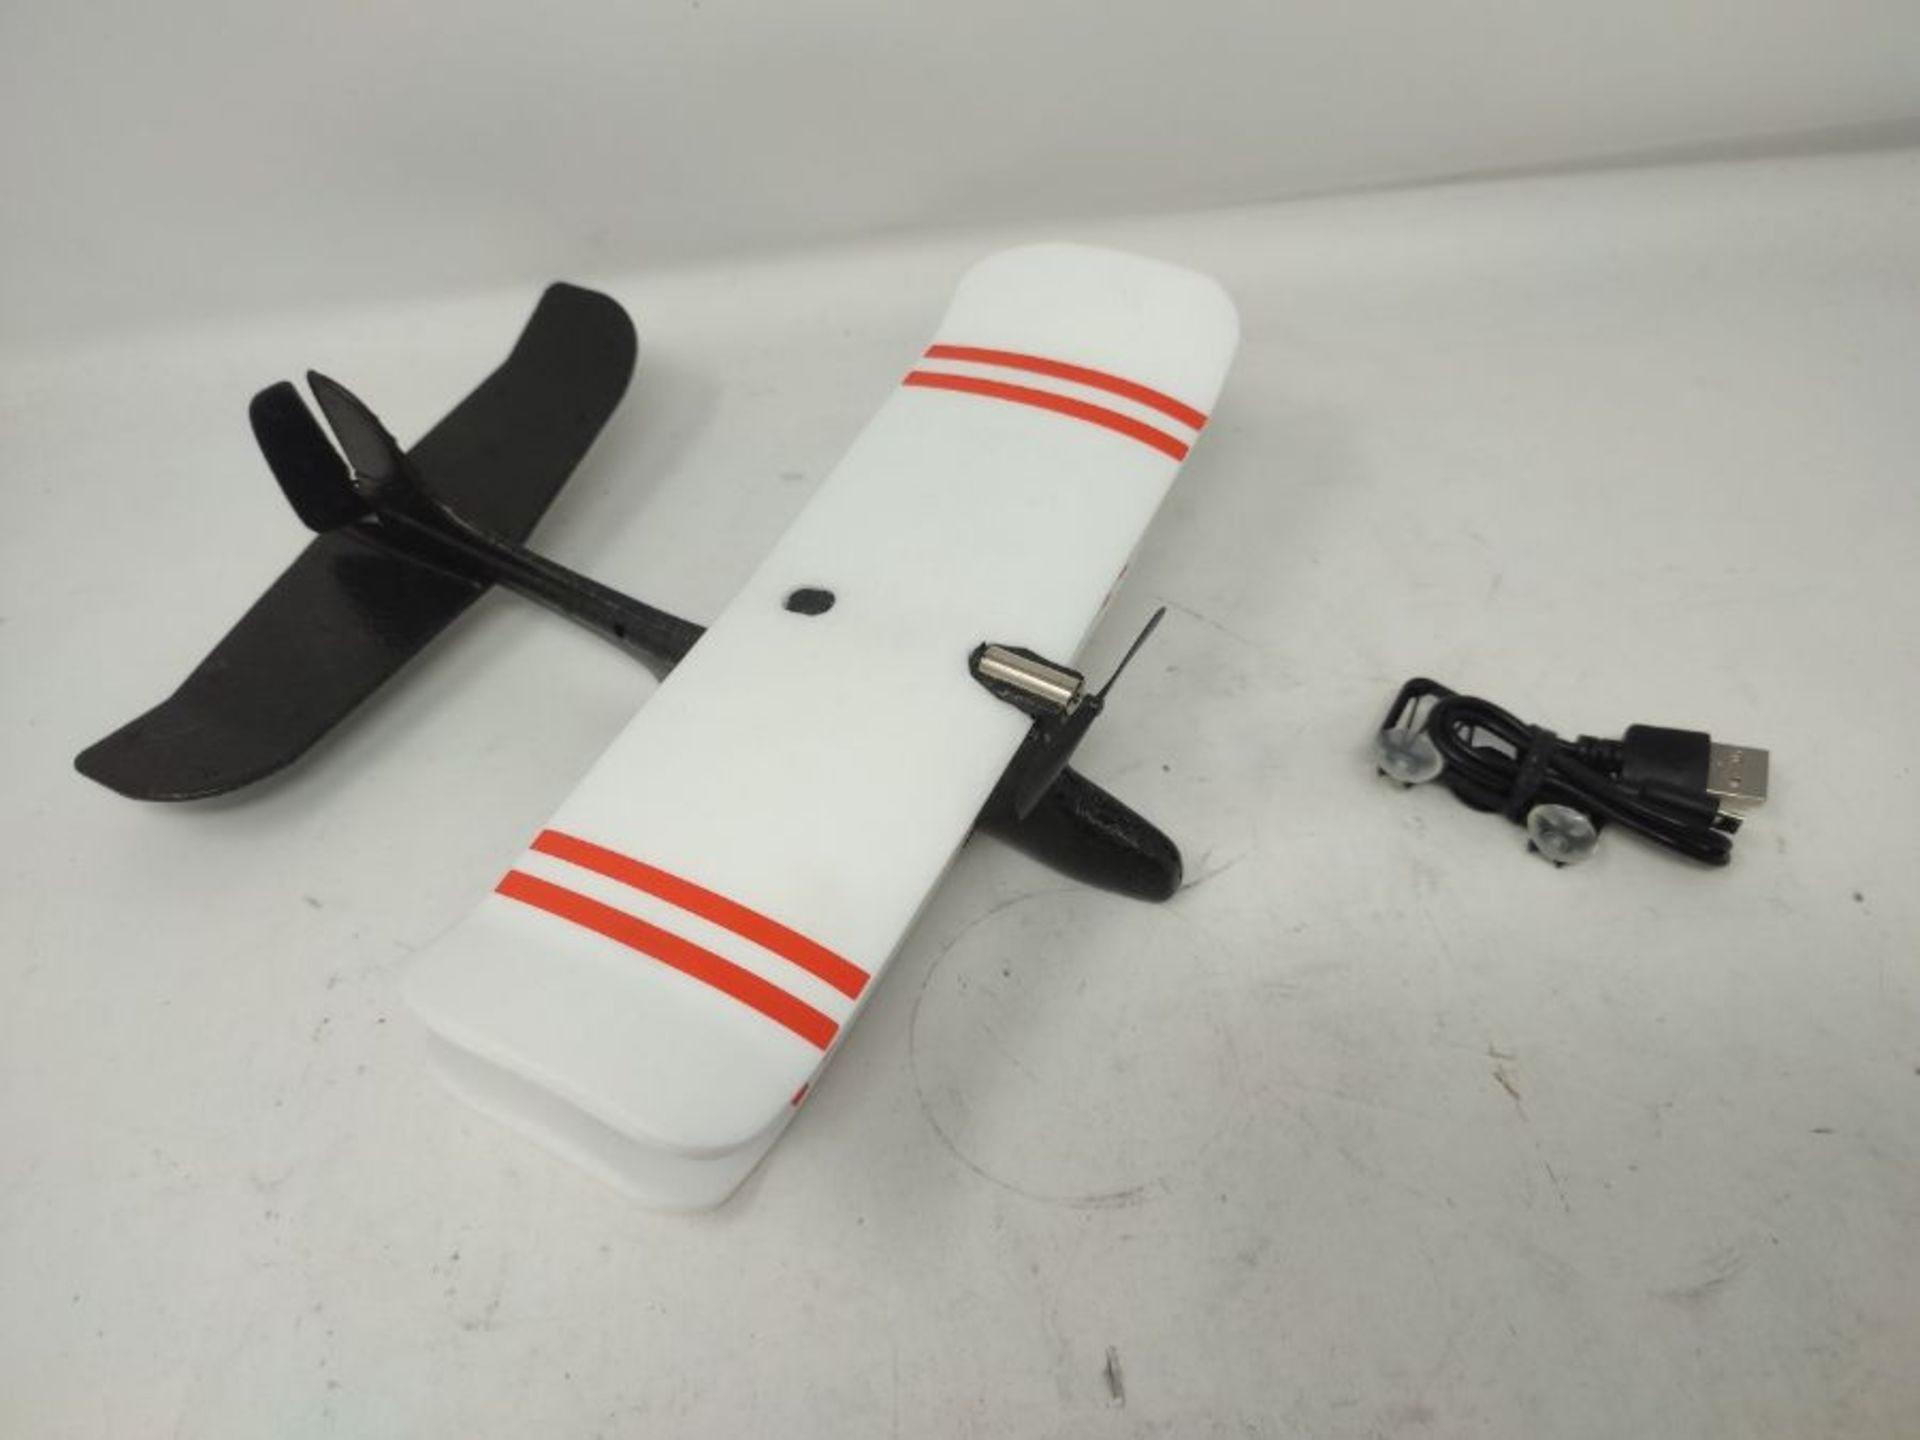 TobyRich SPBL02-016 Moskito Smartphone App Controlled Aero plane - Remote Controlled D - Image 3 of 3